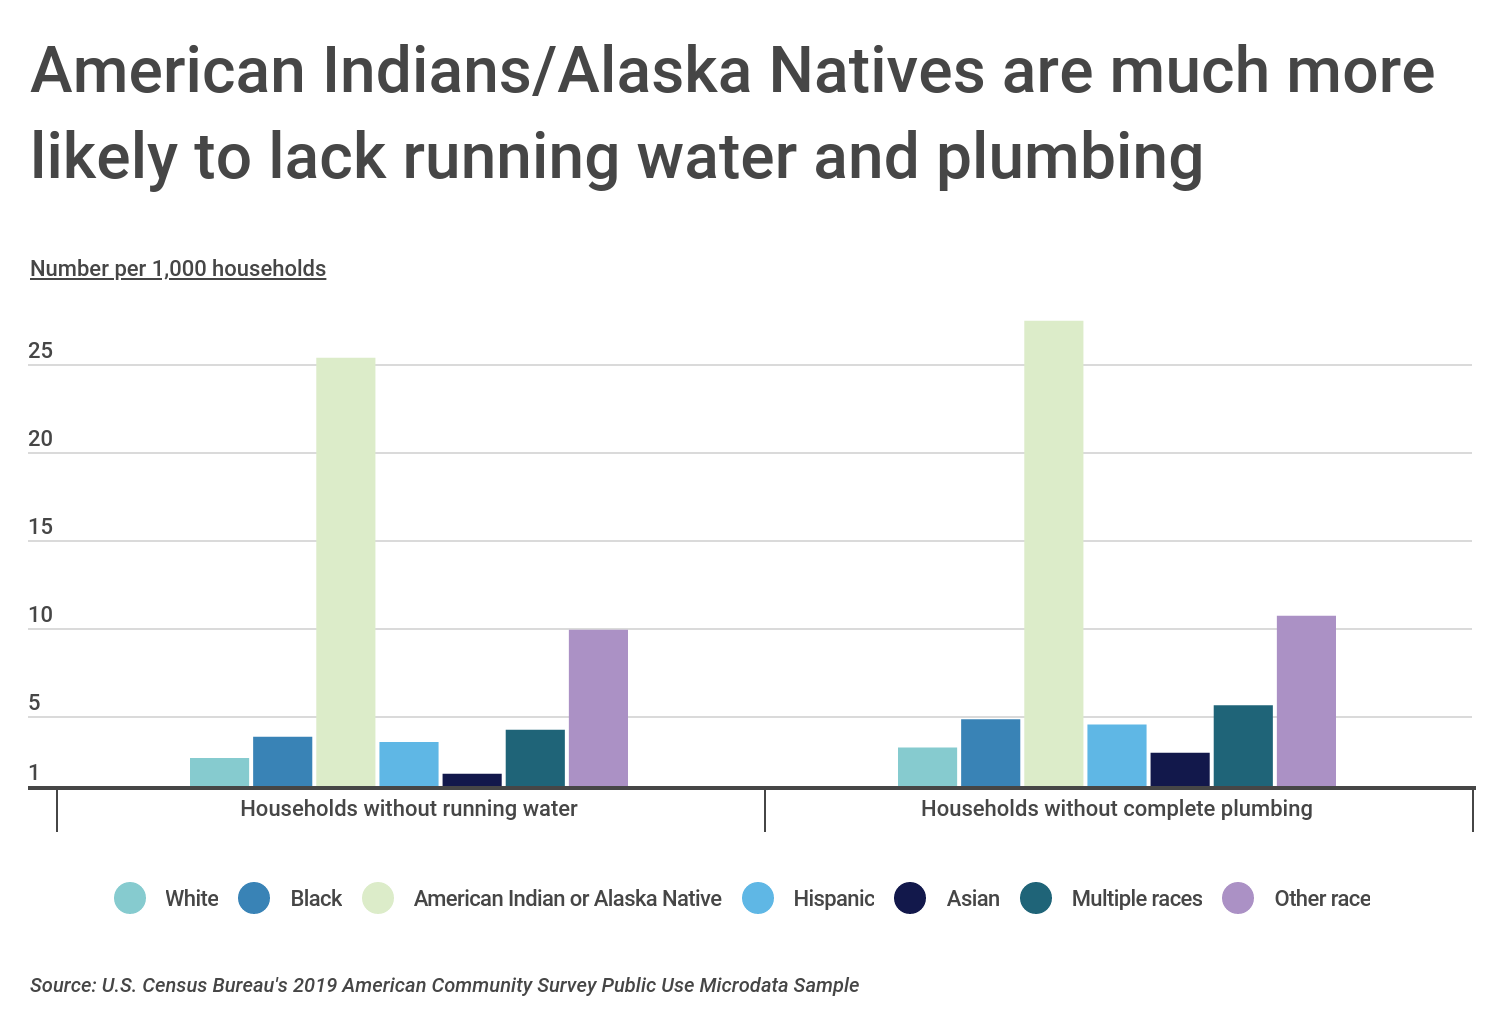 Chart1_American Indians:Alaska Natives are most likely to lack running water